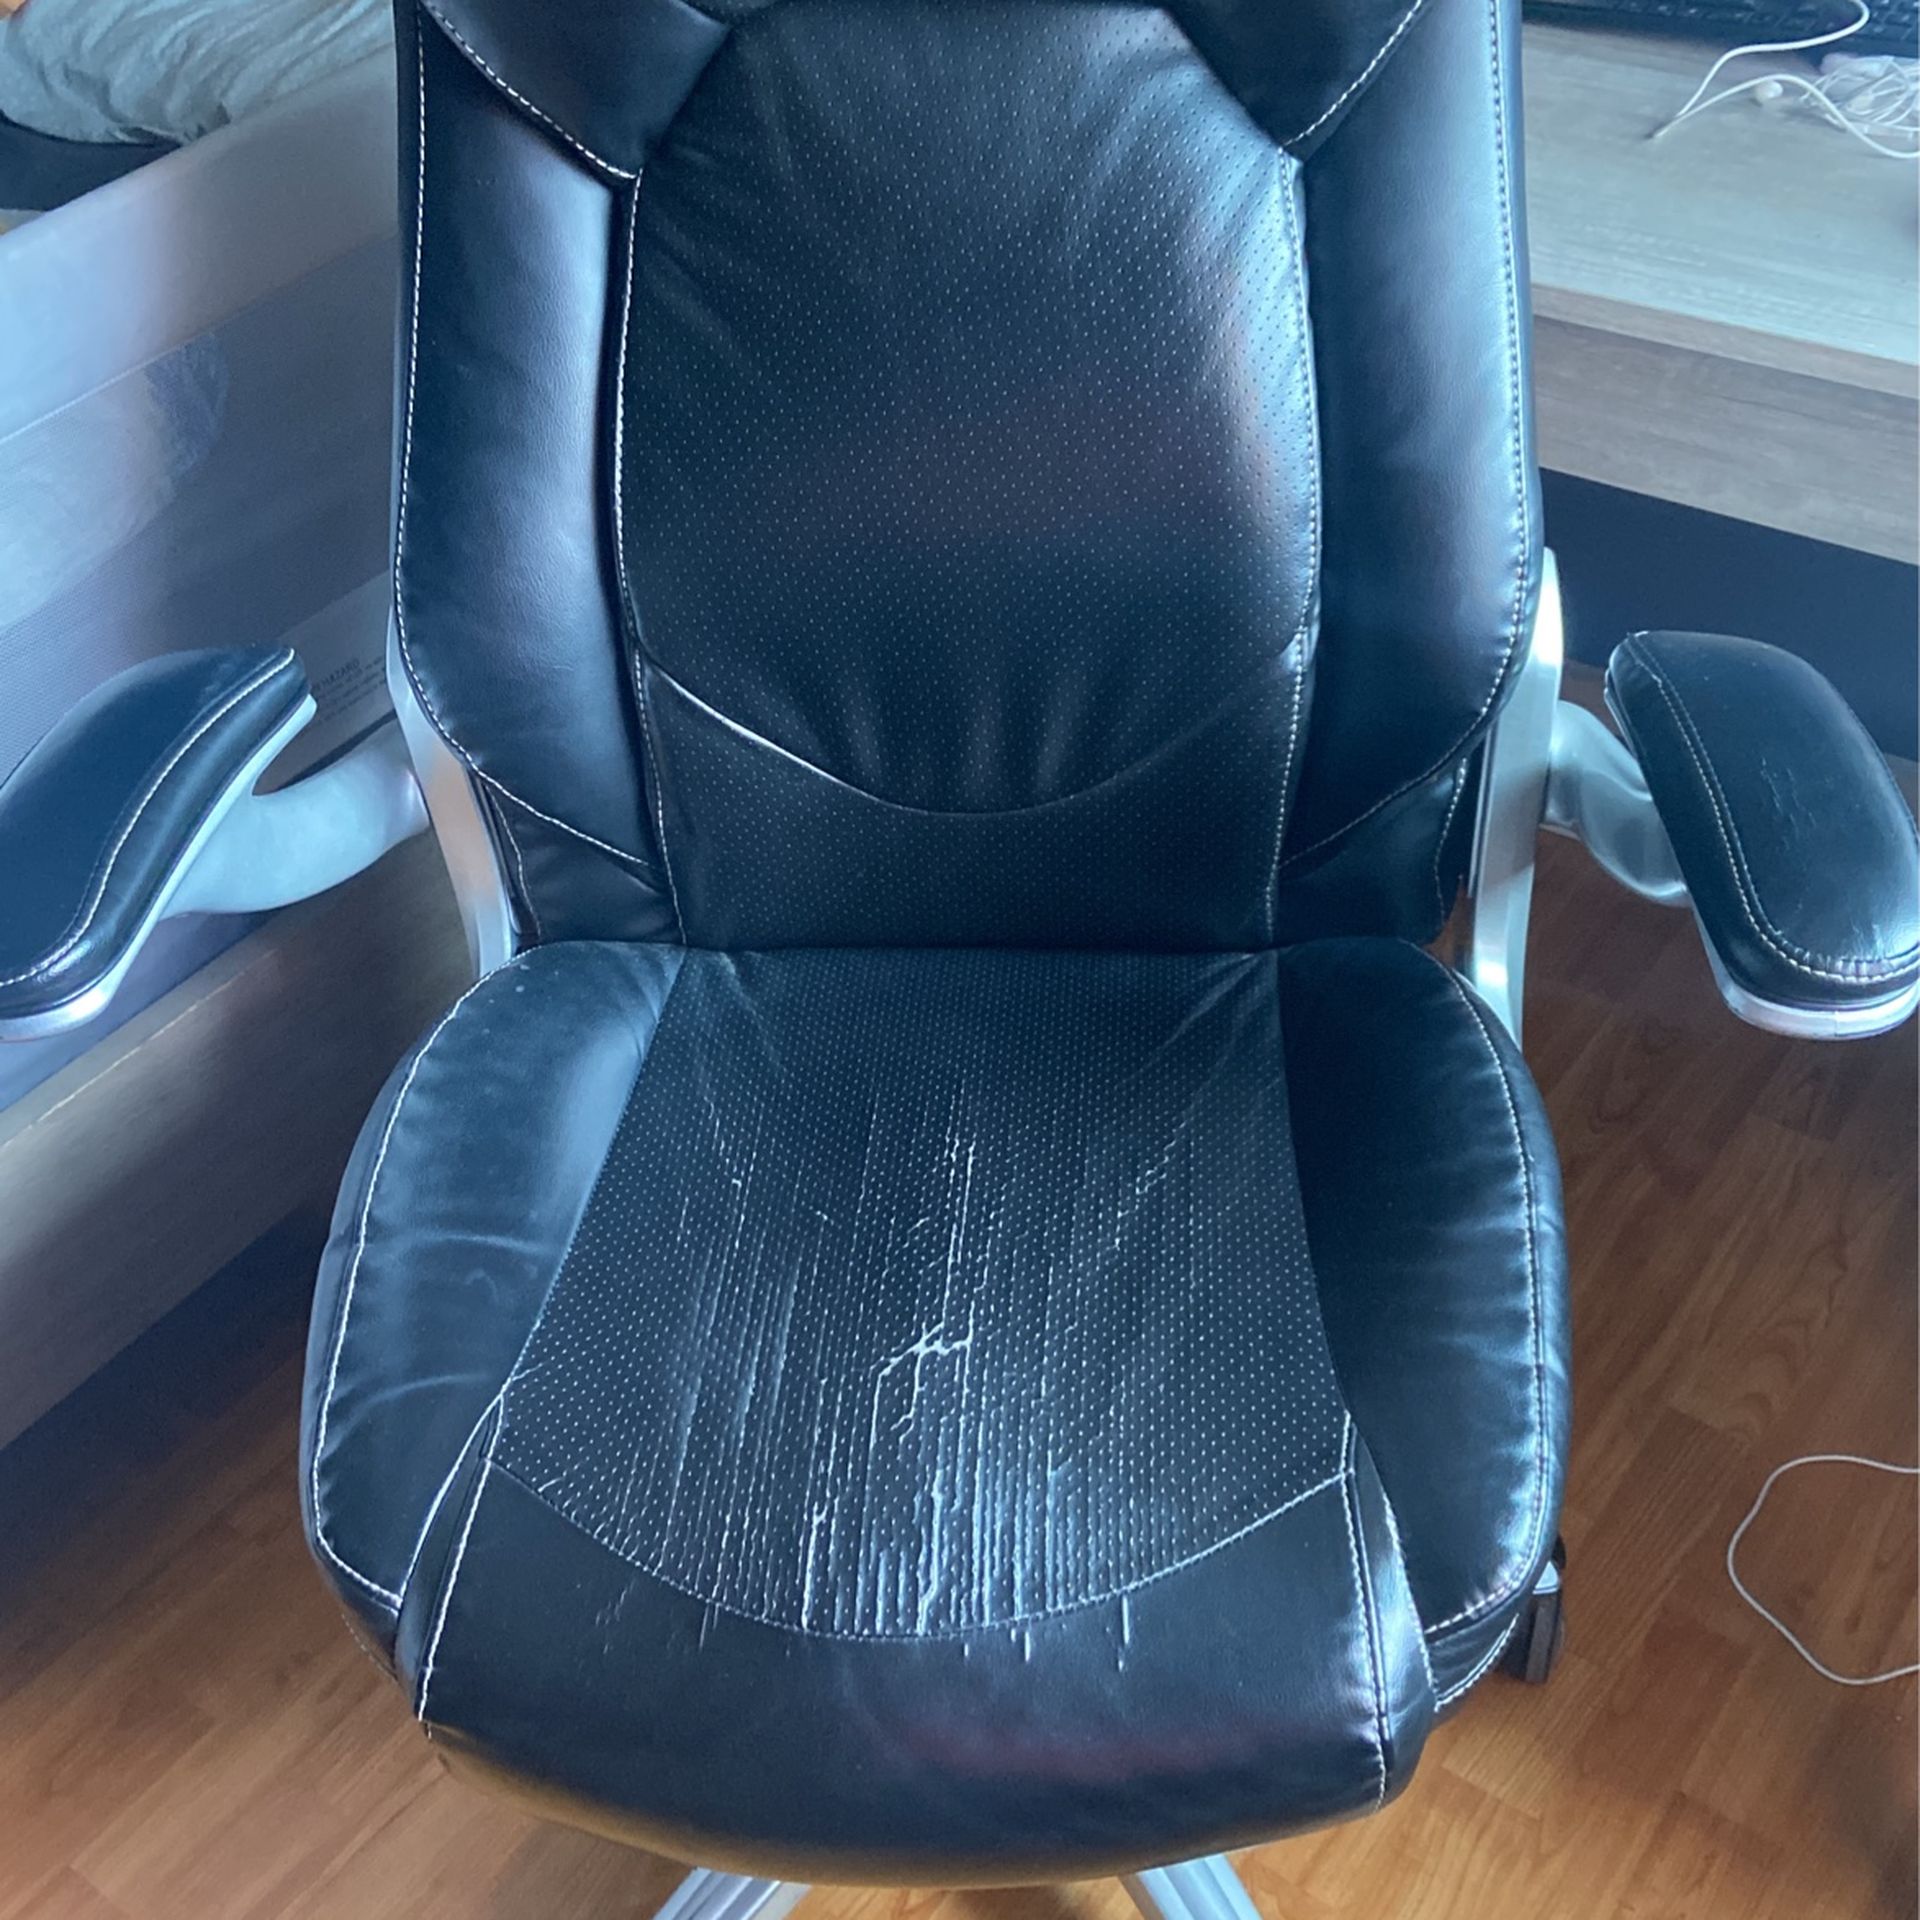 Lazyboy office chair $20